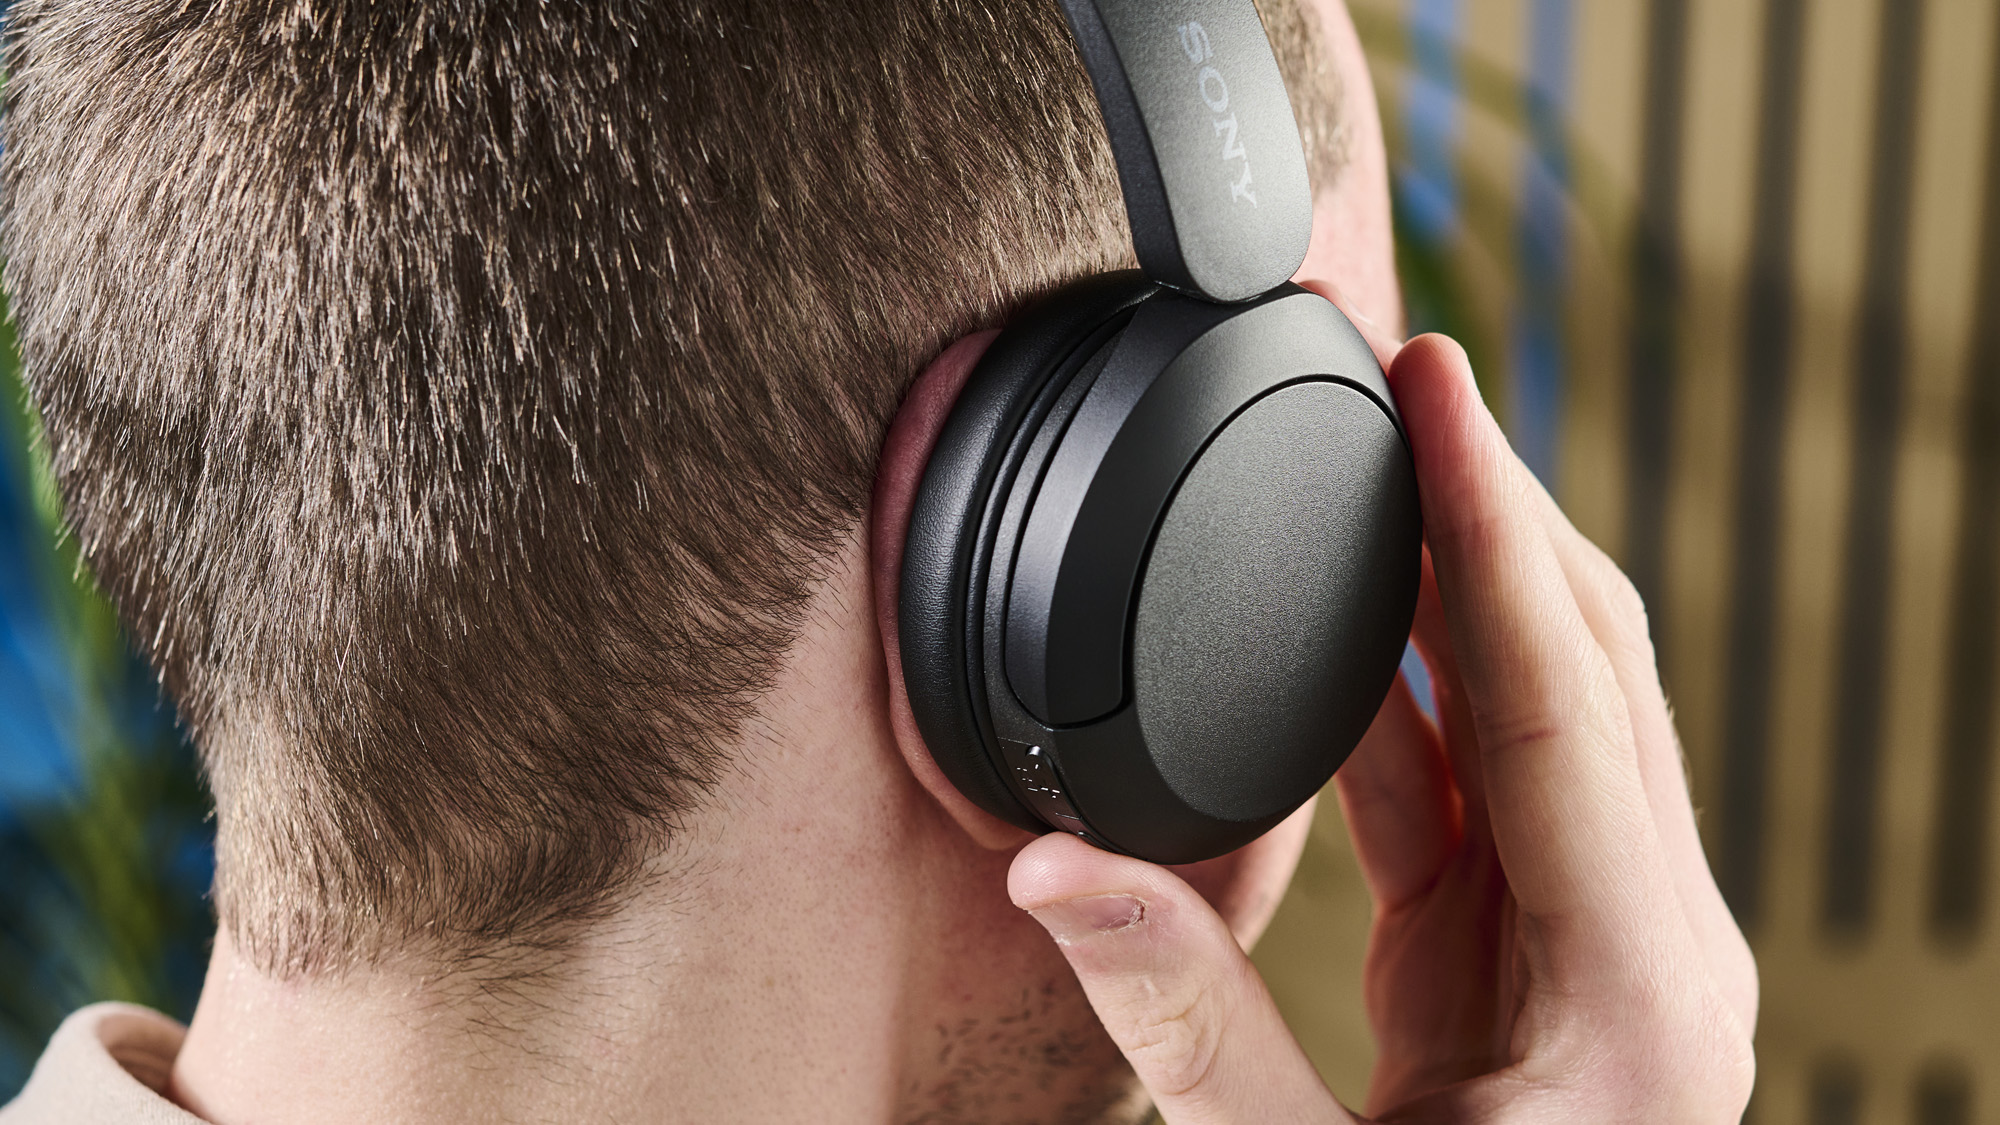 A photo of the Sony WH-CH520 over ear headphones in use with one of the buttons being pressed